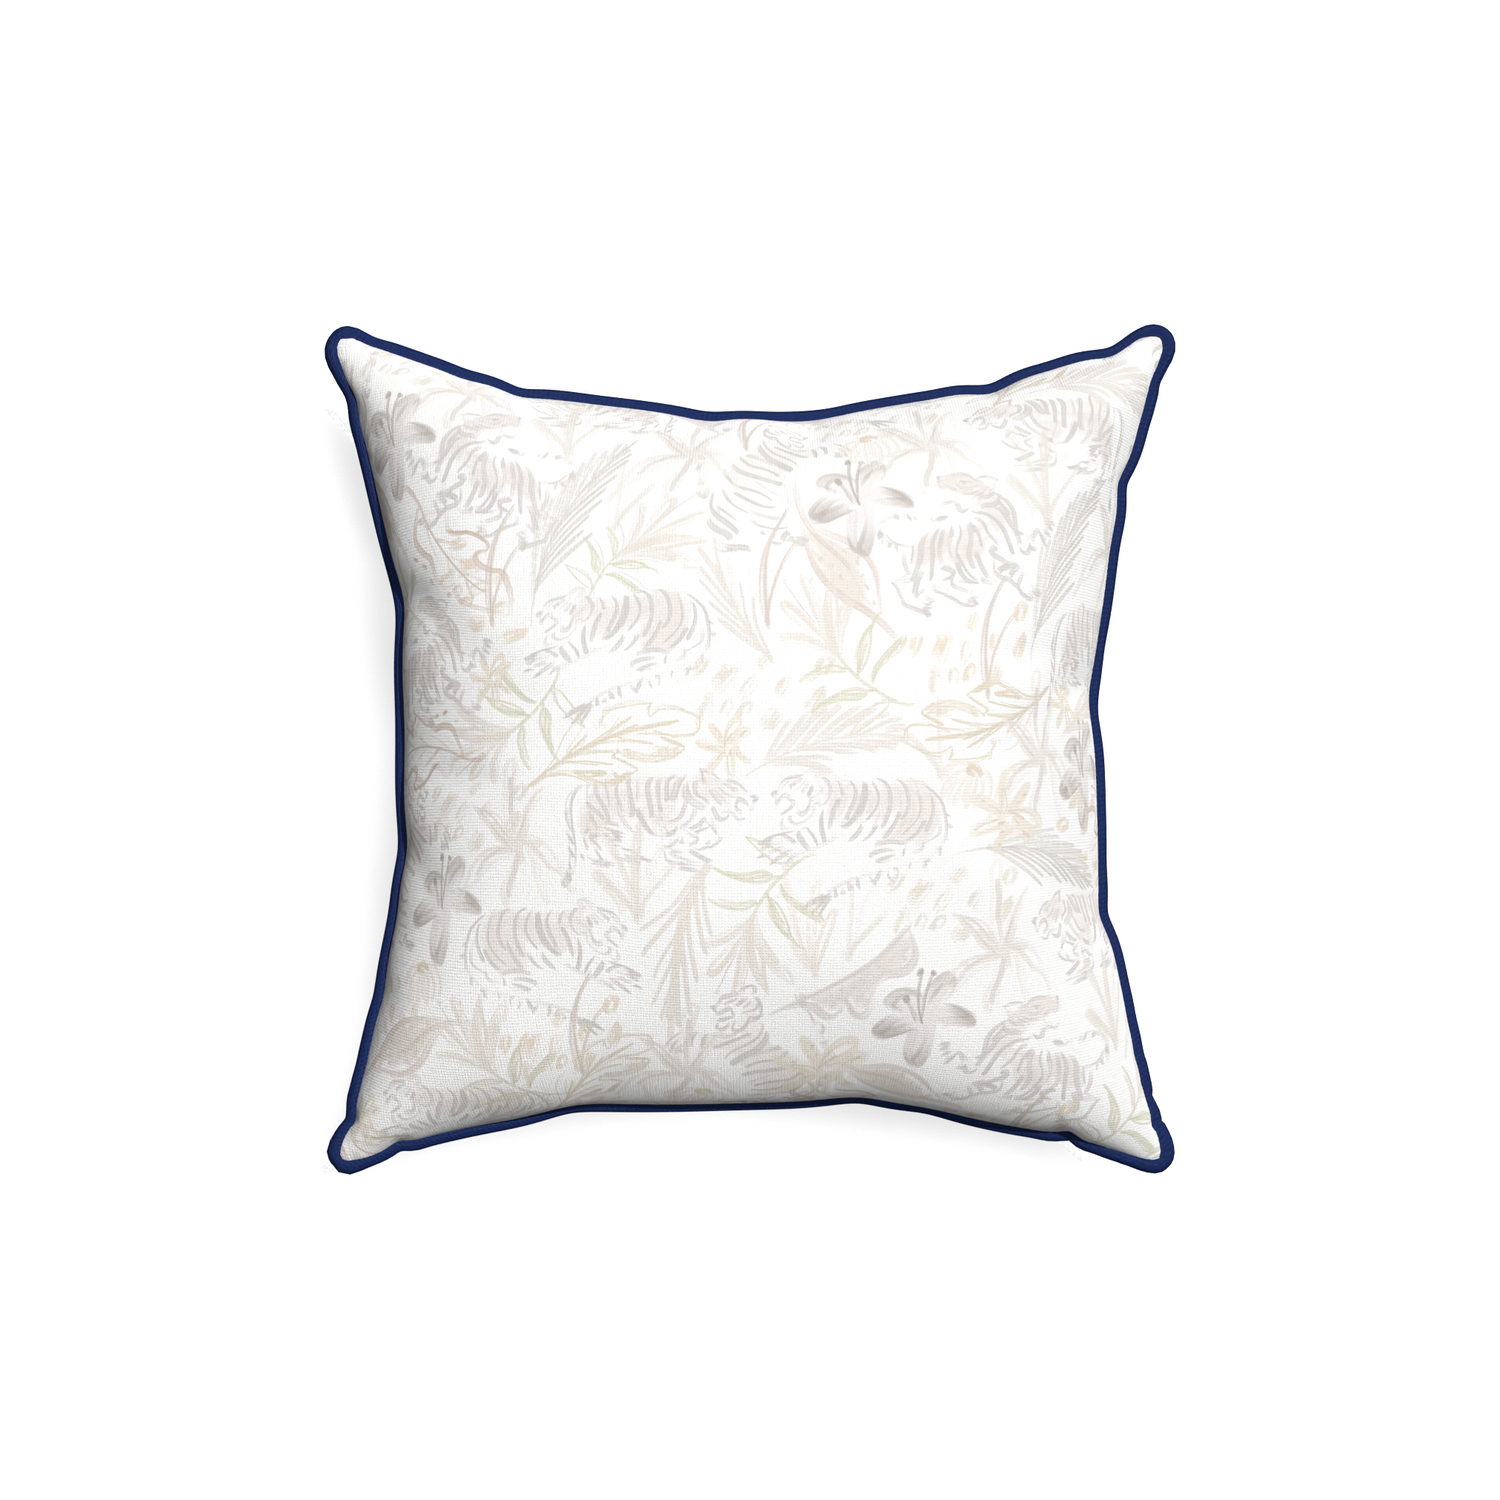 18-square frida sand custom beige chinoiserie tigerpillow with midnight piping on white background